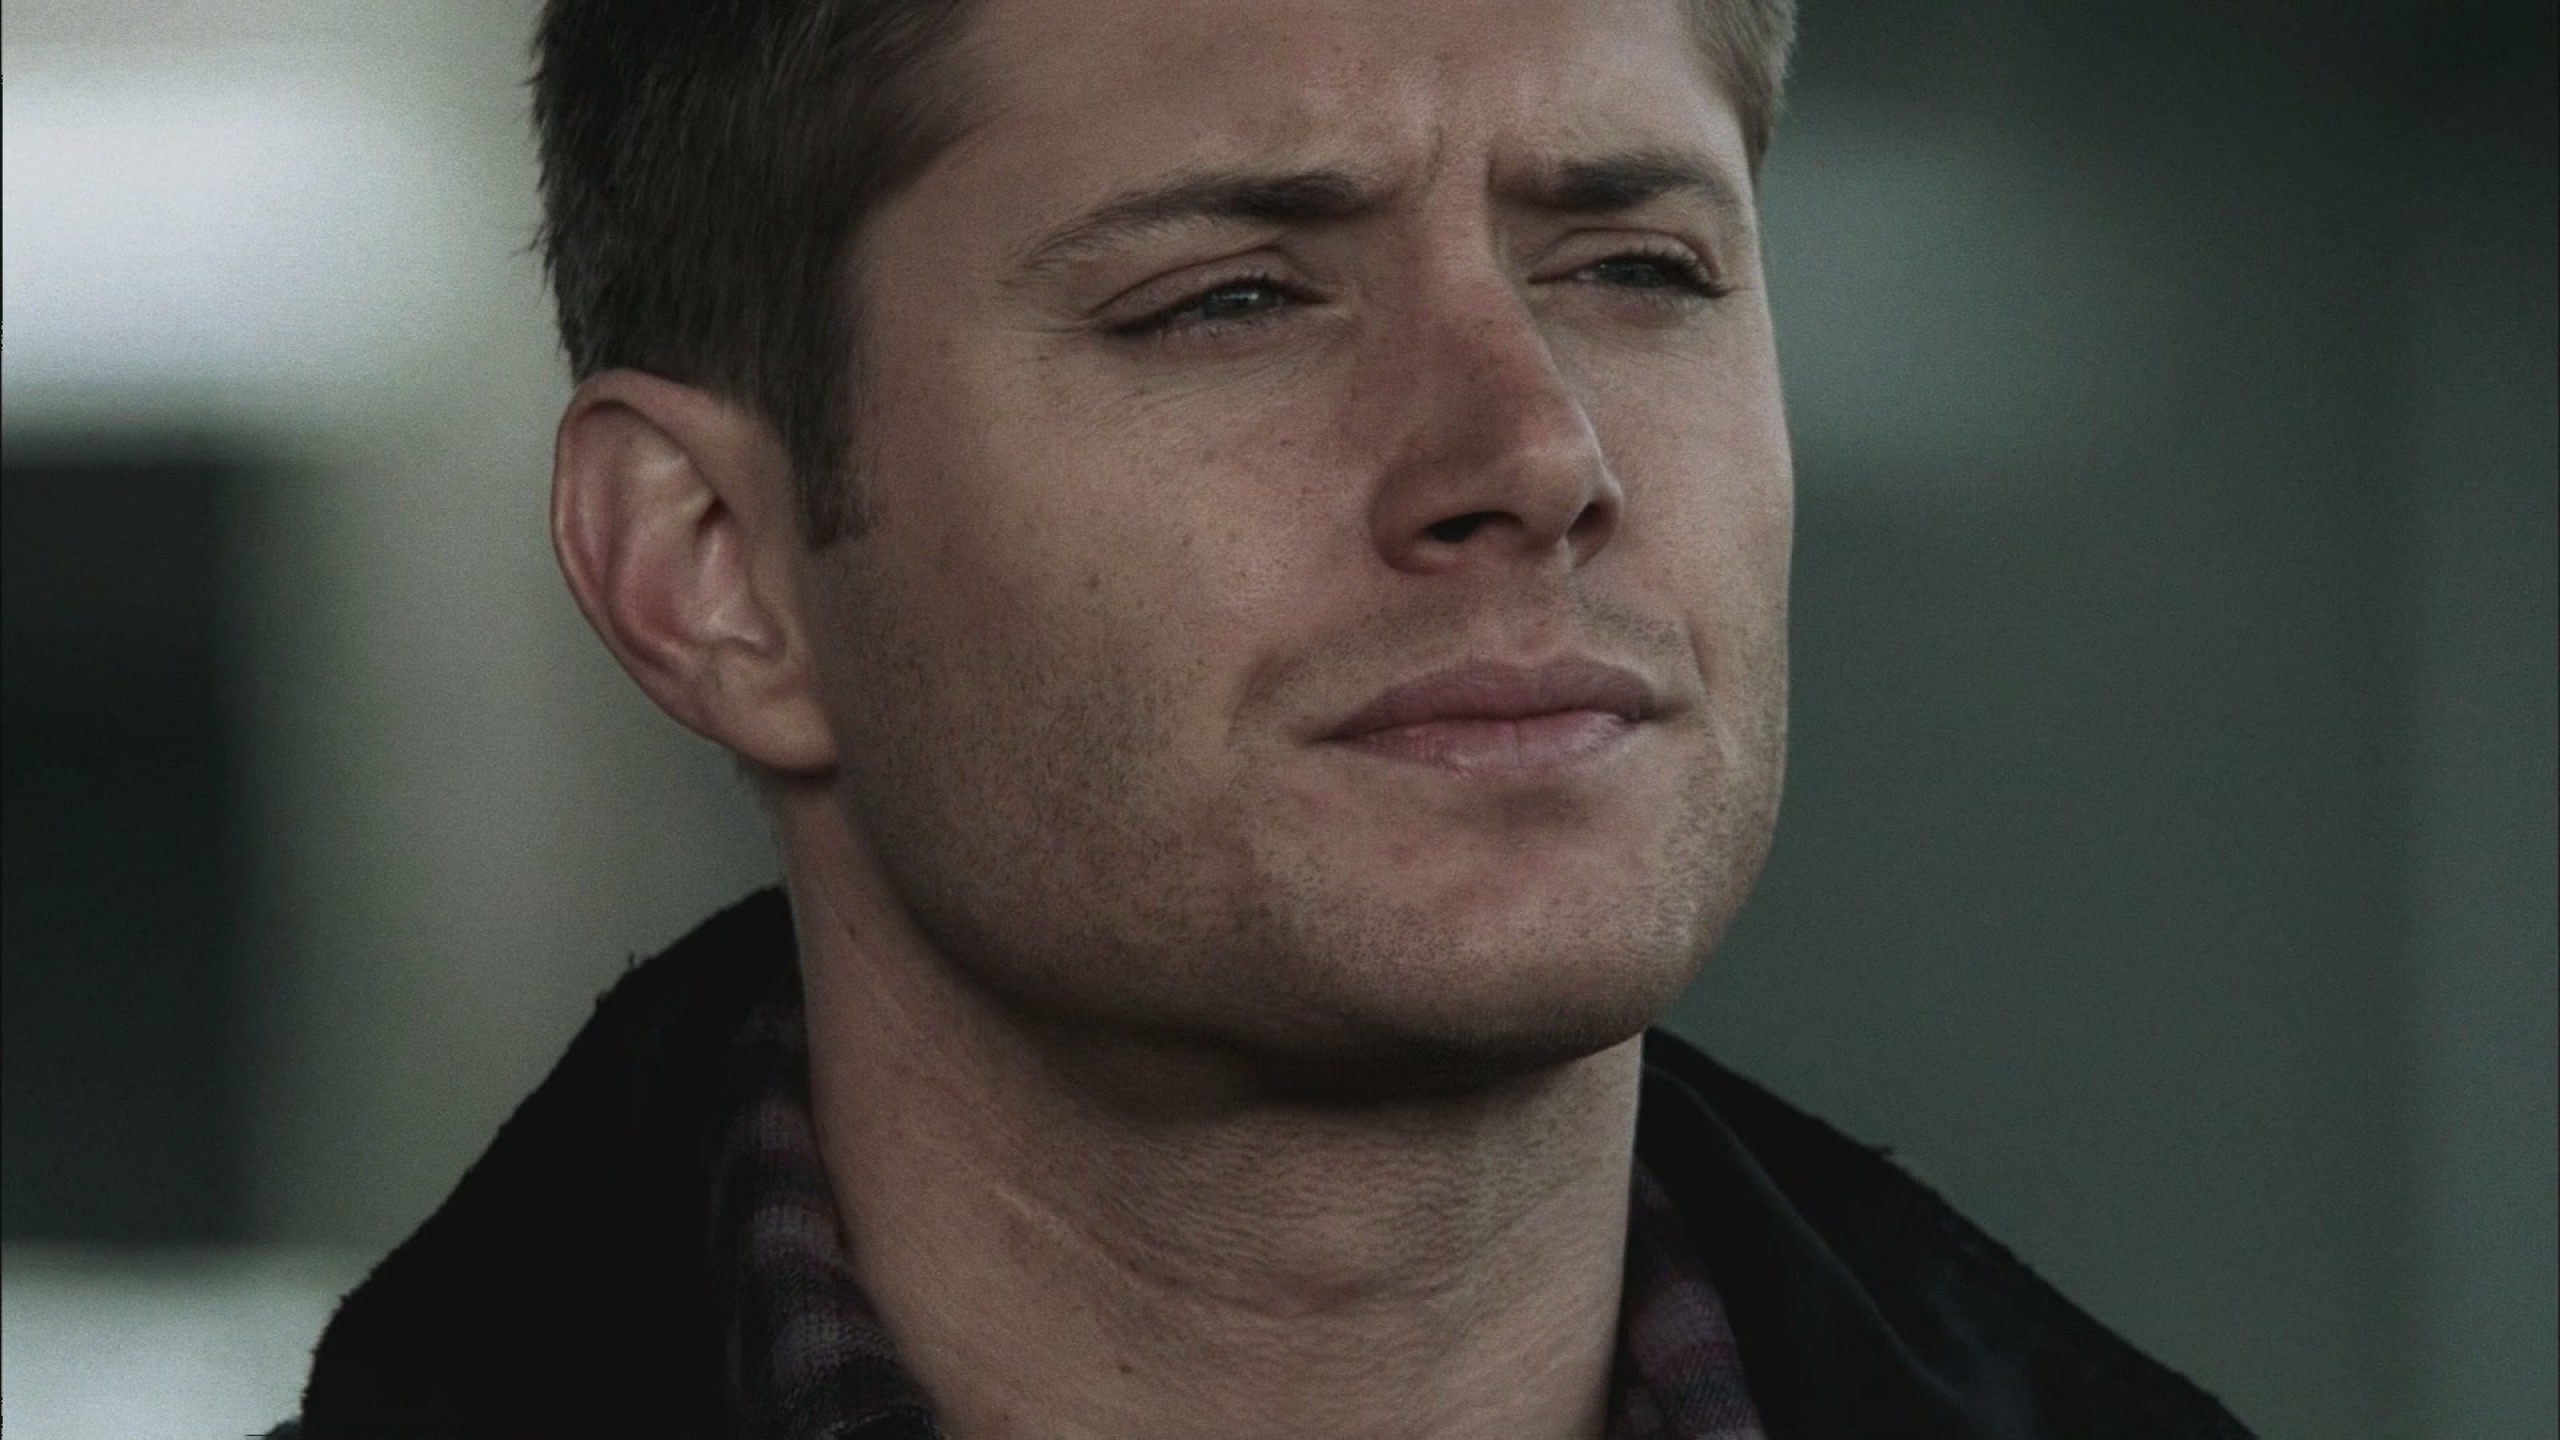 2560x1440 Could someone please make this Jensen Ackles wallpaper 2560x1080?